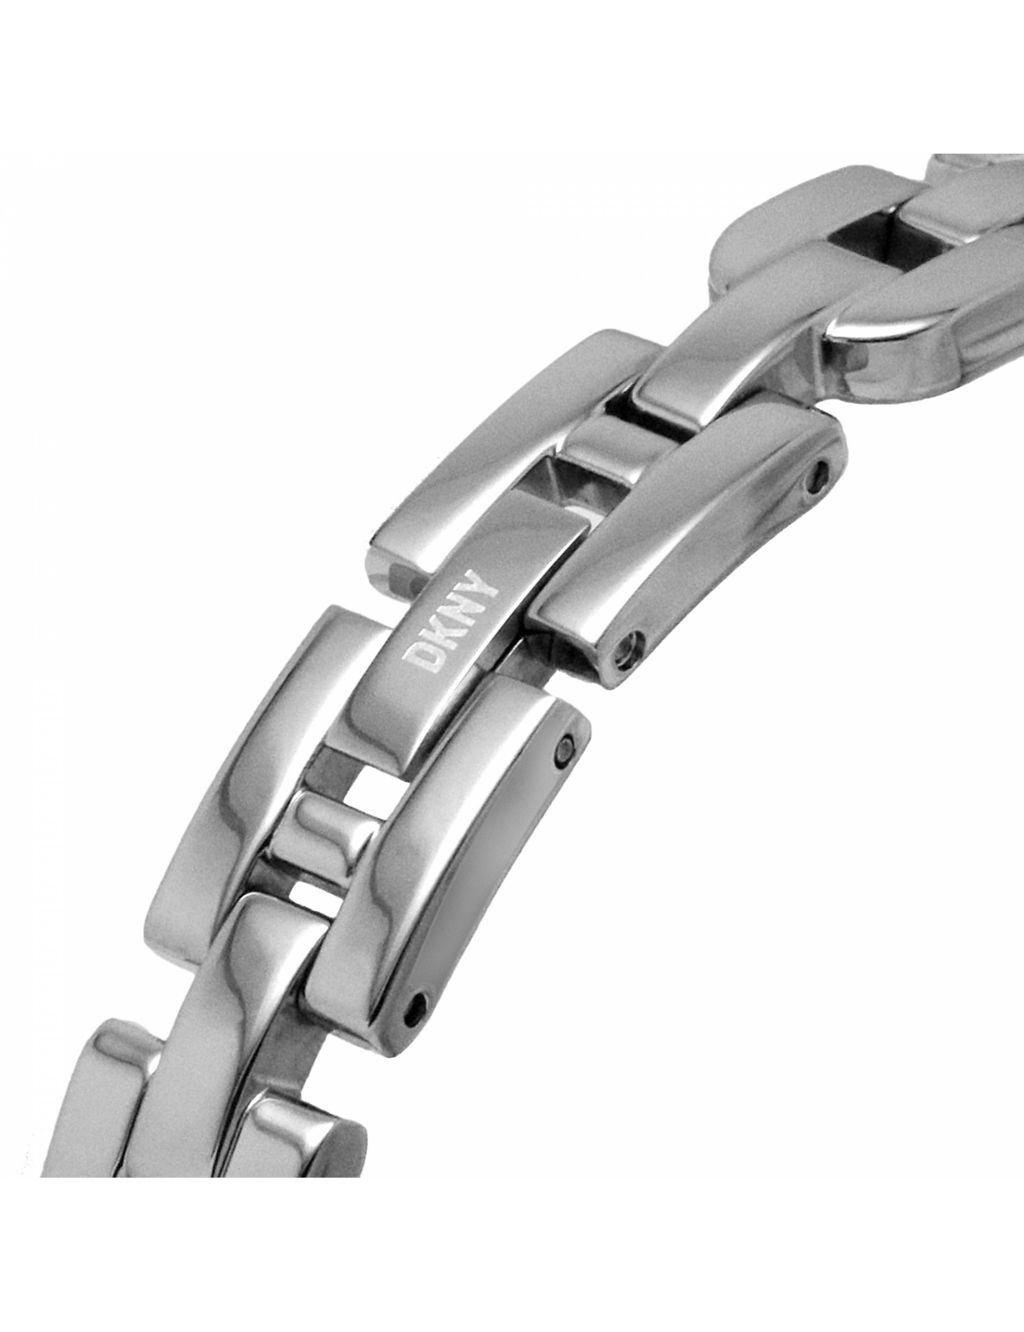 DKNY City Link Silver Watch image 4